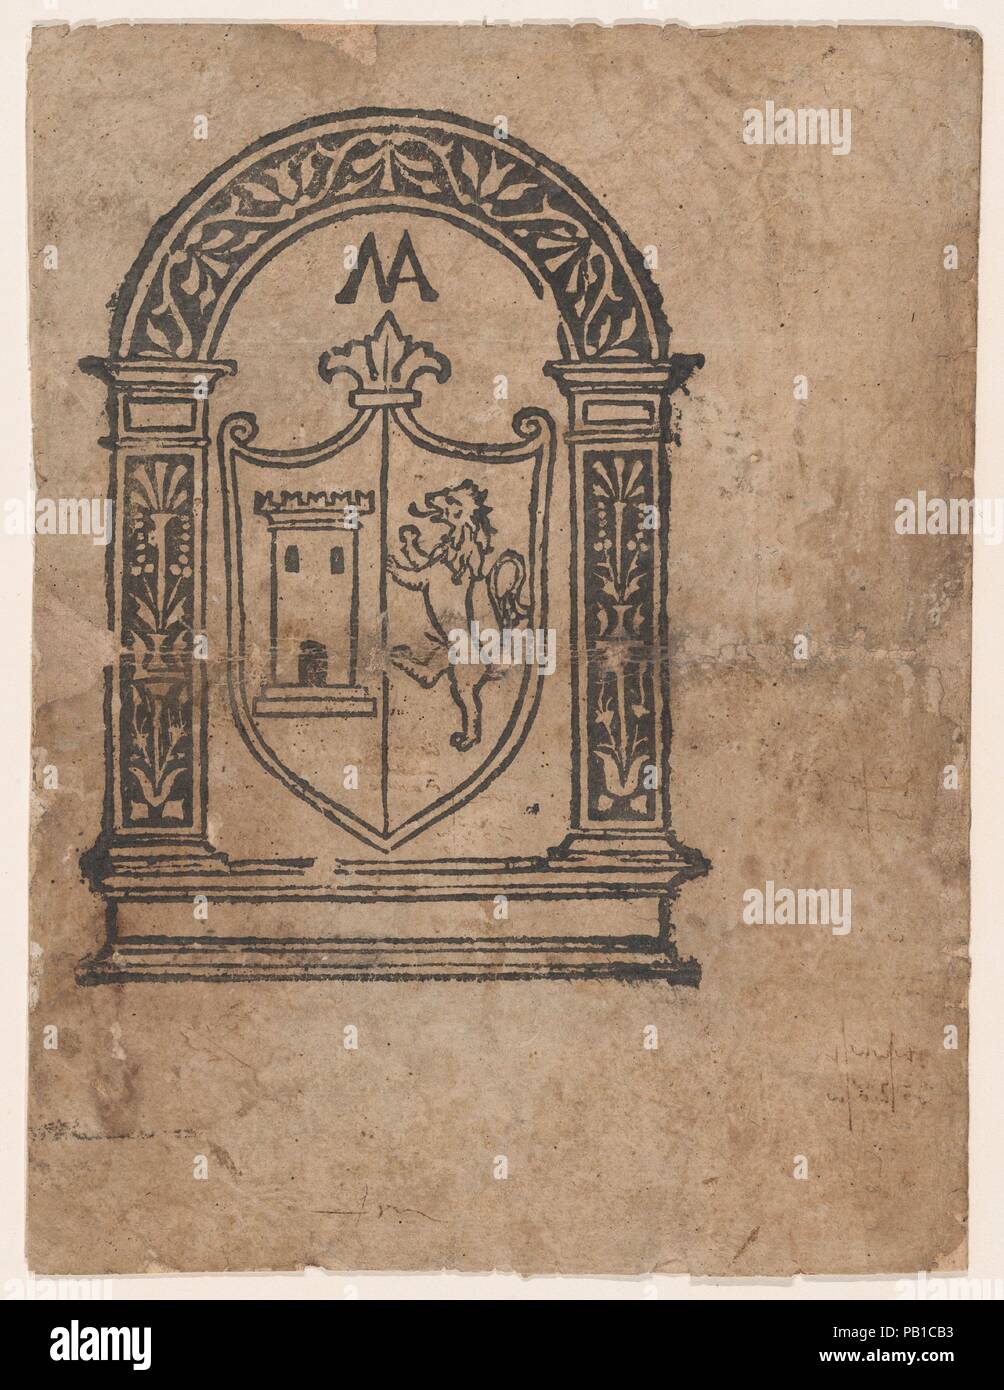 Book illustration or more likely a trademark with a coat of arms featuring a lion and a tower set within an arch. Artist: Anonymous, Italian, 16th century. Dimensions: Sheet: 11 13/16 × 17 15/16 in. (30 × 45.5 cm). Date: 16th century.  Giustiniano degli Azzi Vitelleschi's article in the Mitteilungen der Gesellschaft für vervielfältigende Kunst (1929, nr .2/3, pp.37-45)  describes a collection of woodcuts, including this print (number 4).  Vitelleschi believes these prints are trade devices, not intended for book covers, but rather were used as covers to account books. In addition, these emblem Stock Photo